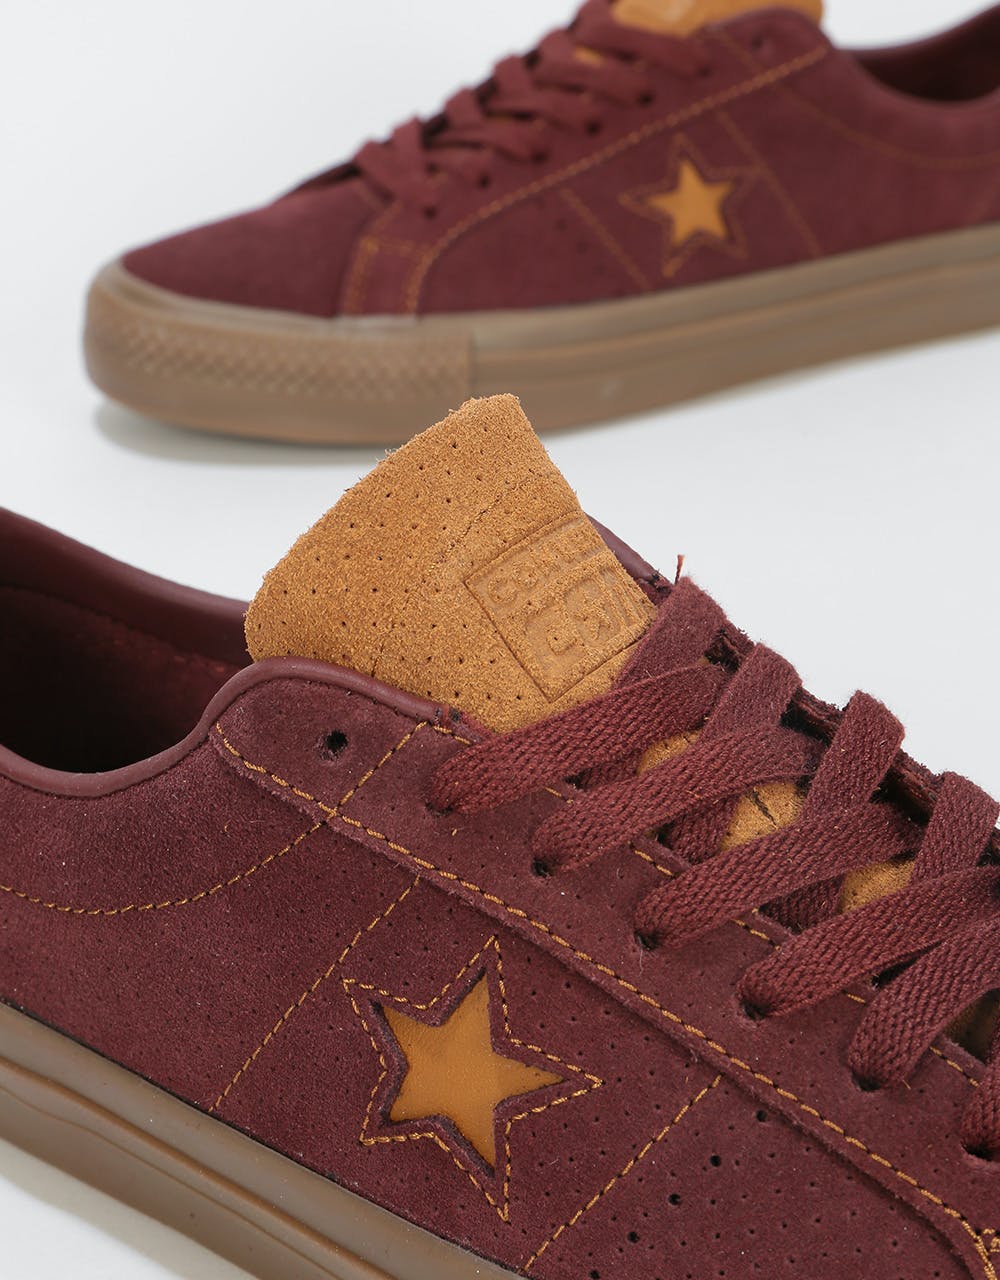 Converse One Star Pro Ox Skate Shoes - Barkroot Brown/Ale Brown/Brown